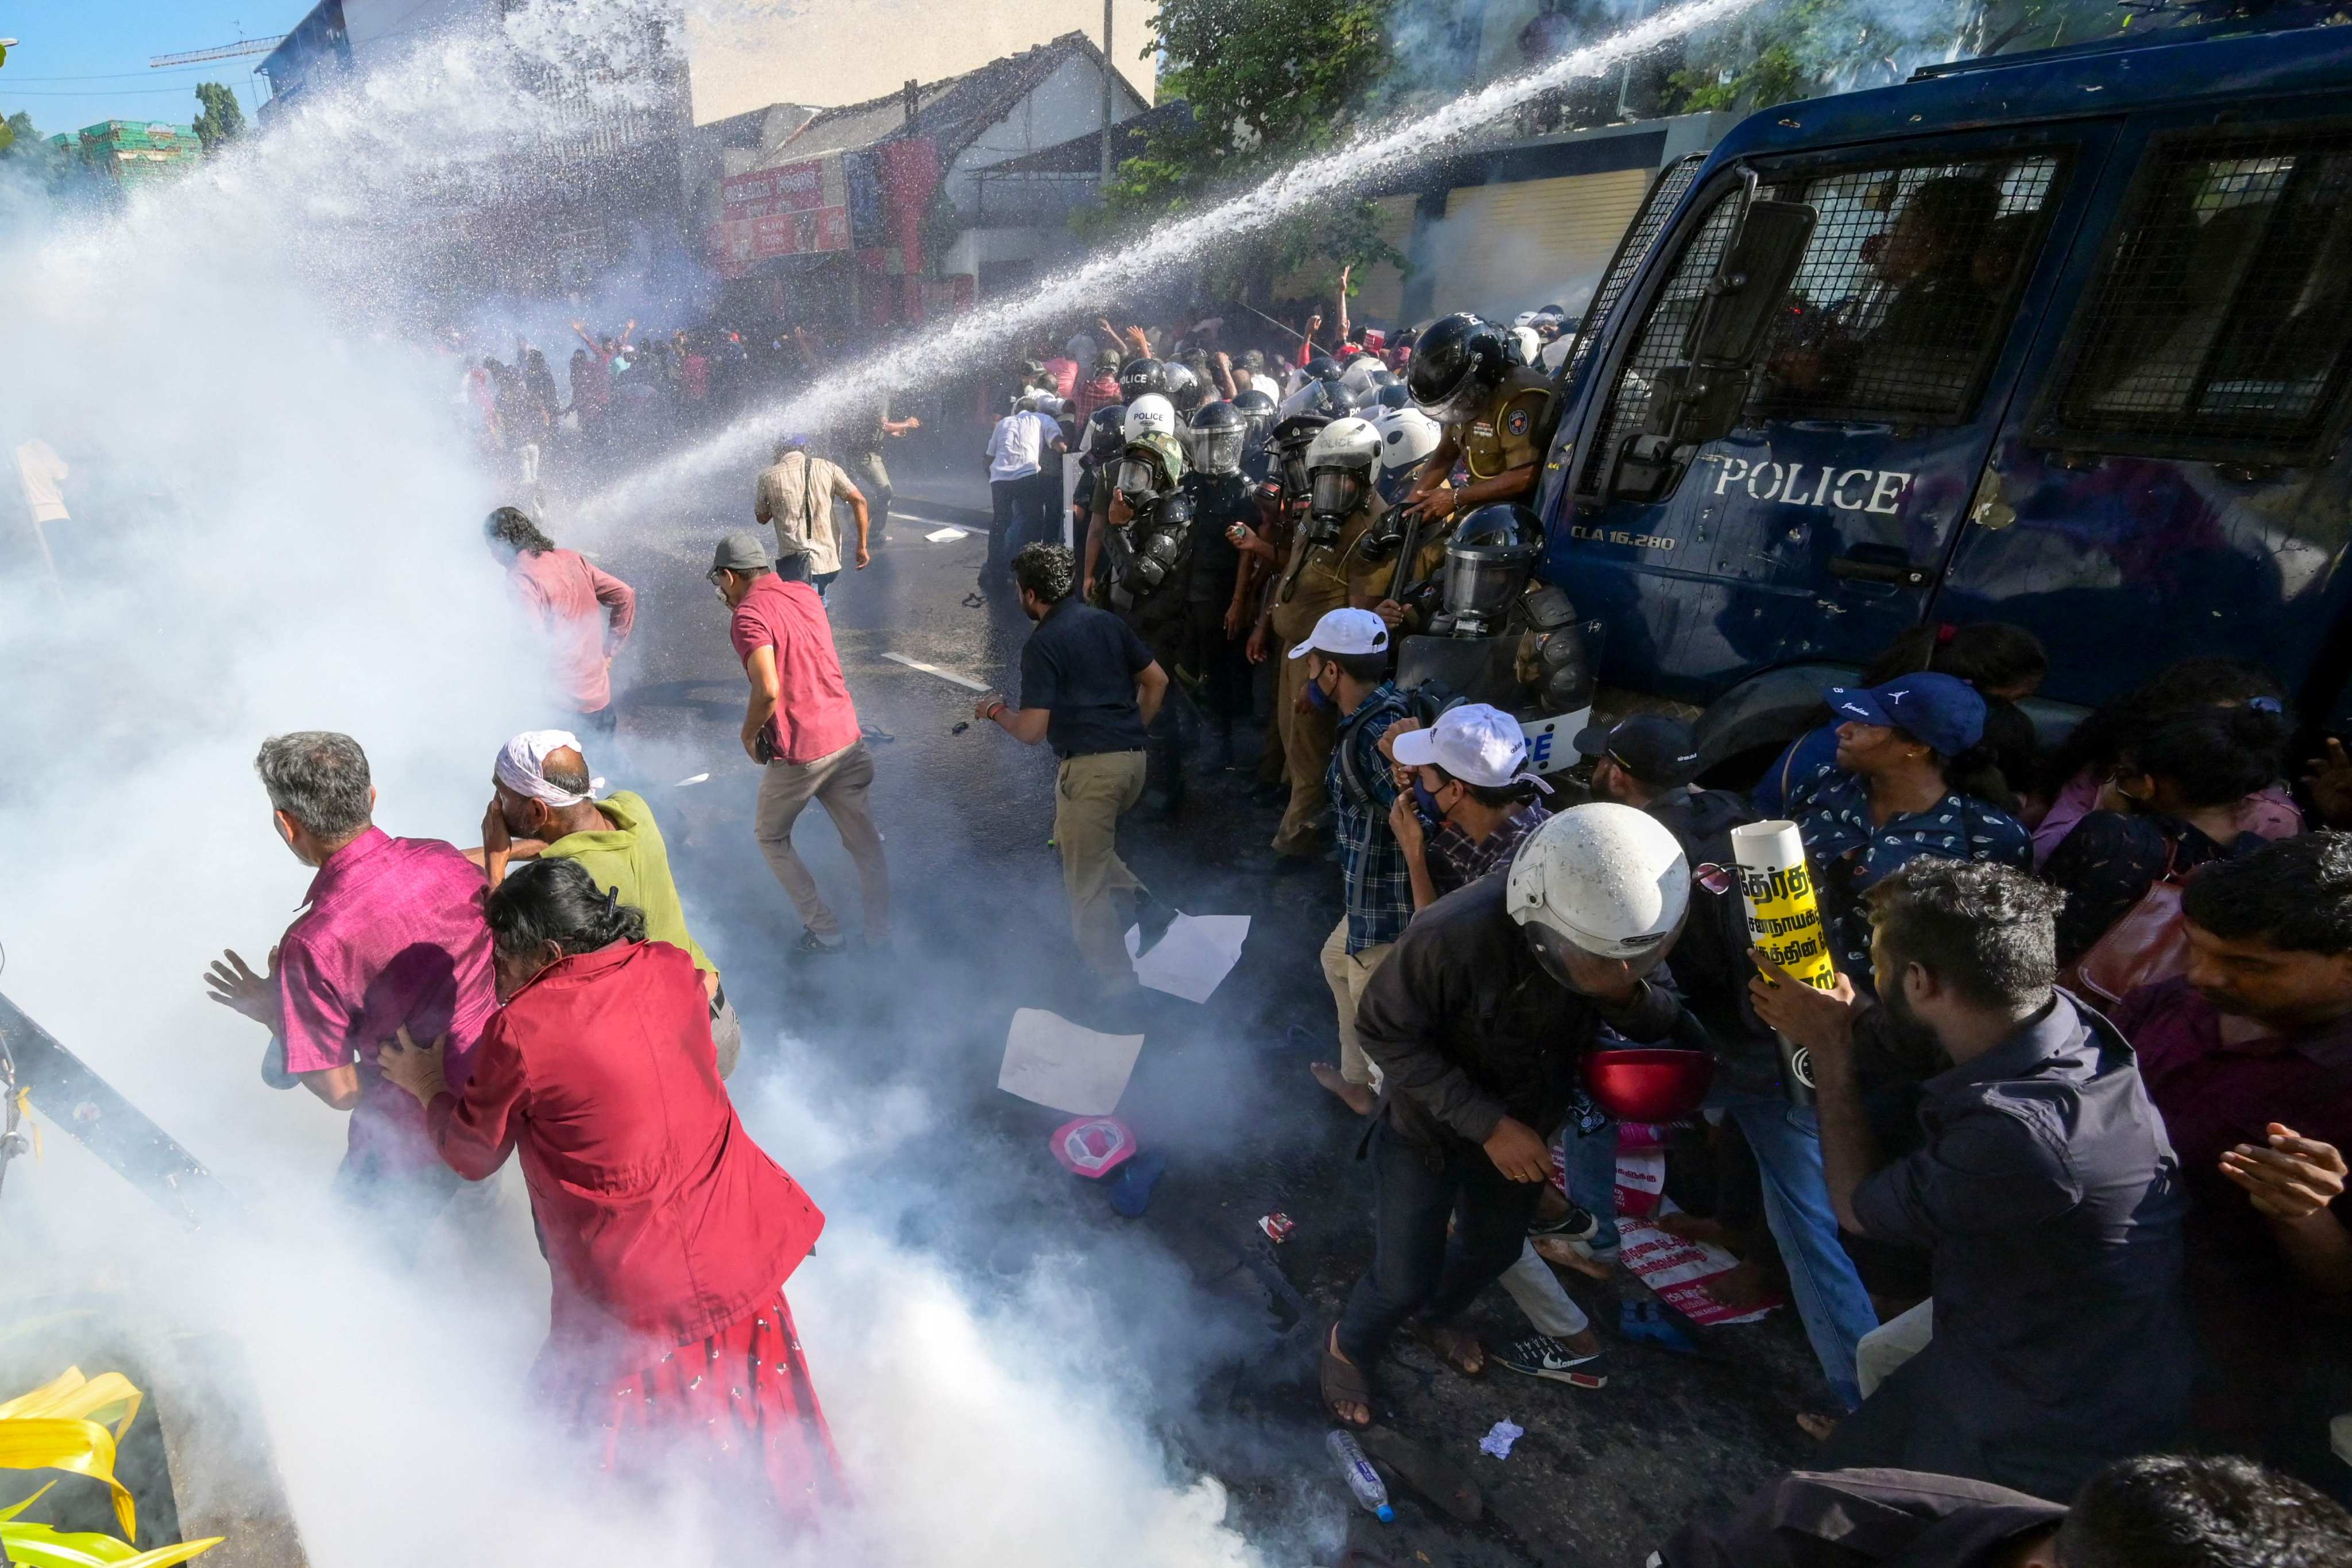 Police use water cannons and tear gas to disperse activists of the opposition National People’s Power (NPP) party during a protest held to urge the government to hold local council election as scheduled. Photo: AFP